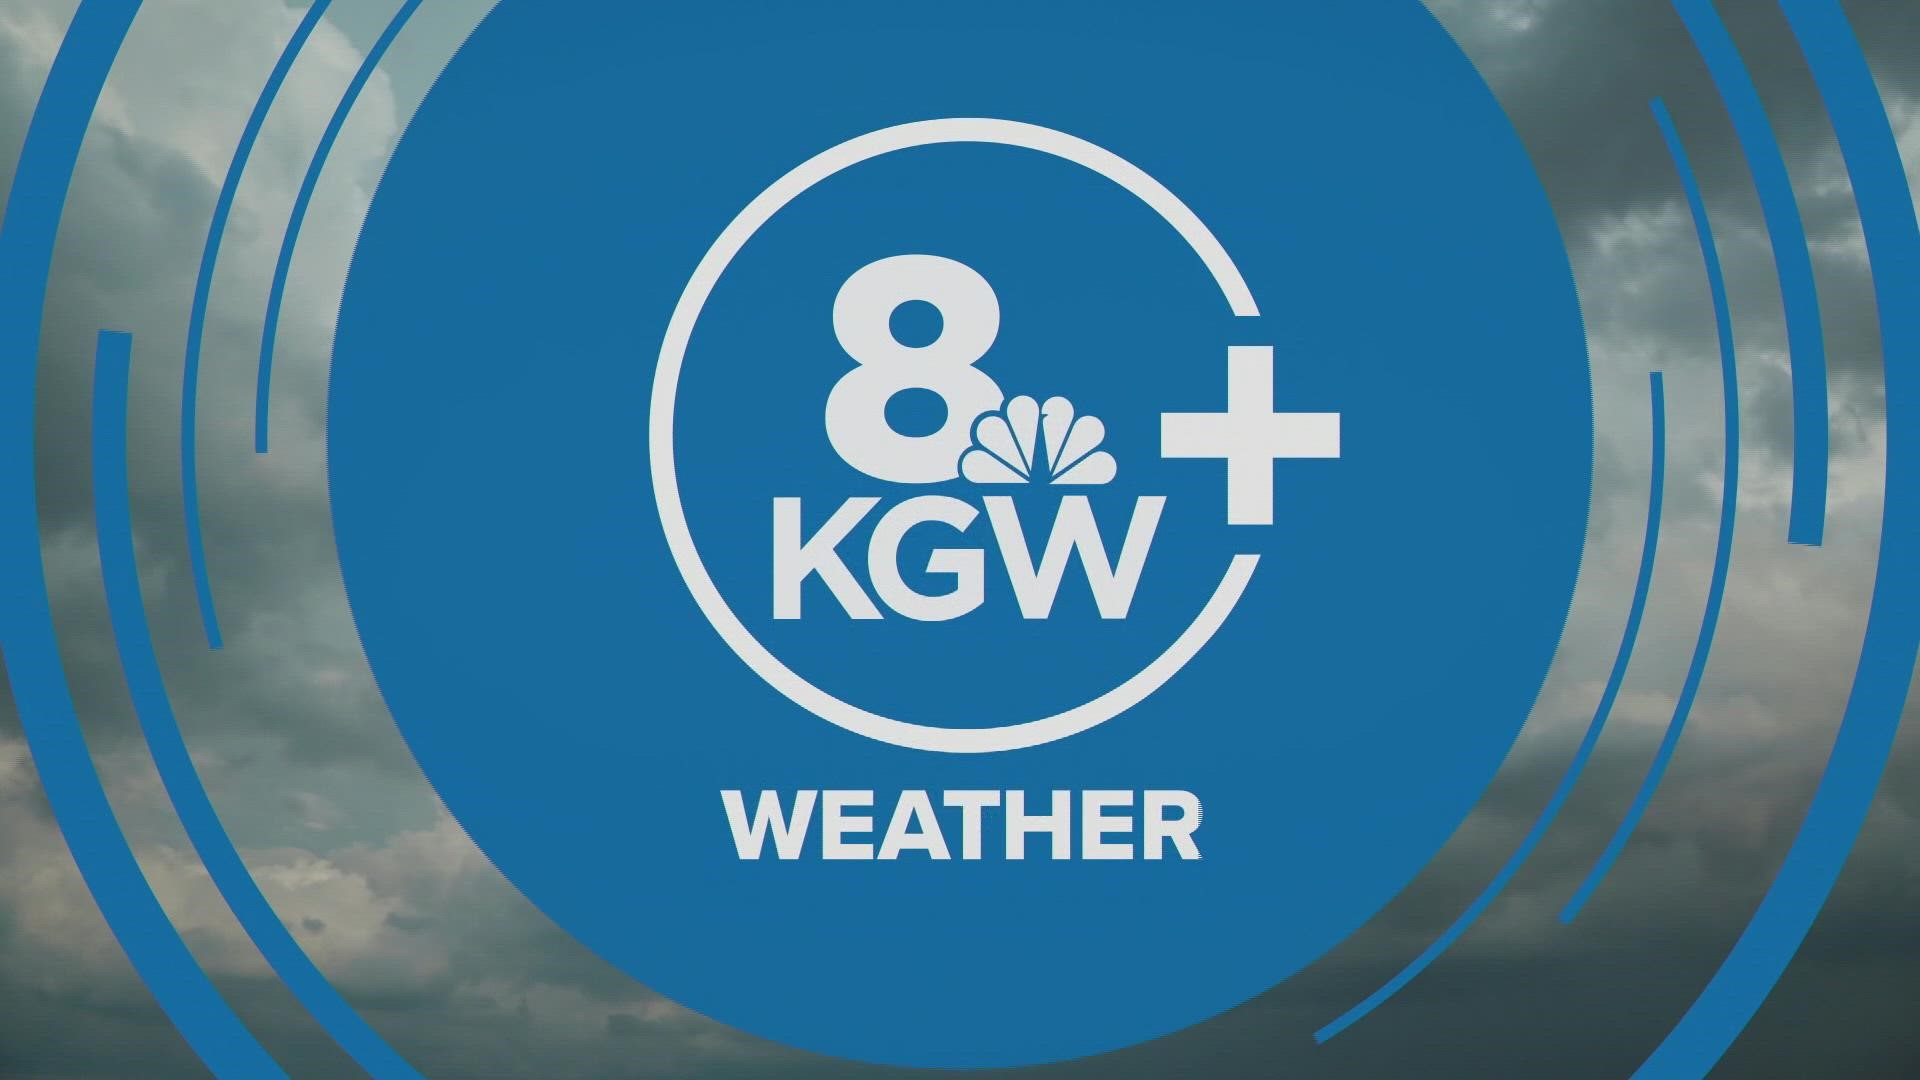 KGW meteorologist Rod Hill has the latest forecast for the Portland metro and surrounding areas for Tuesday, Aug. 9, 2022.